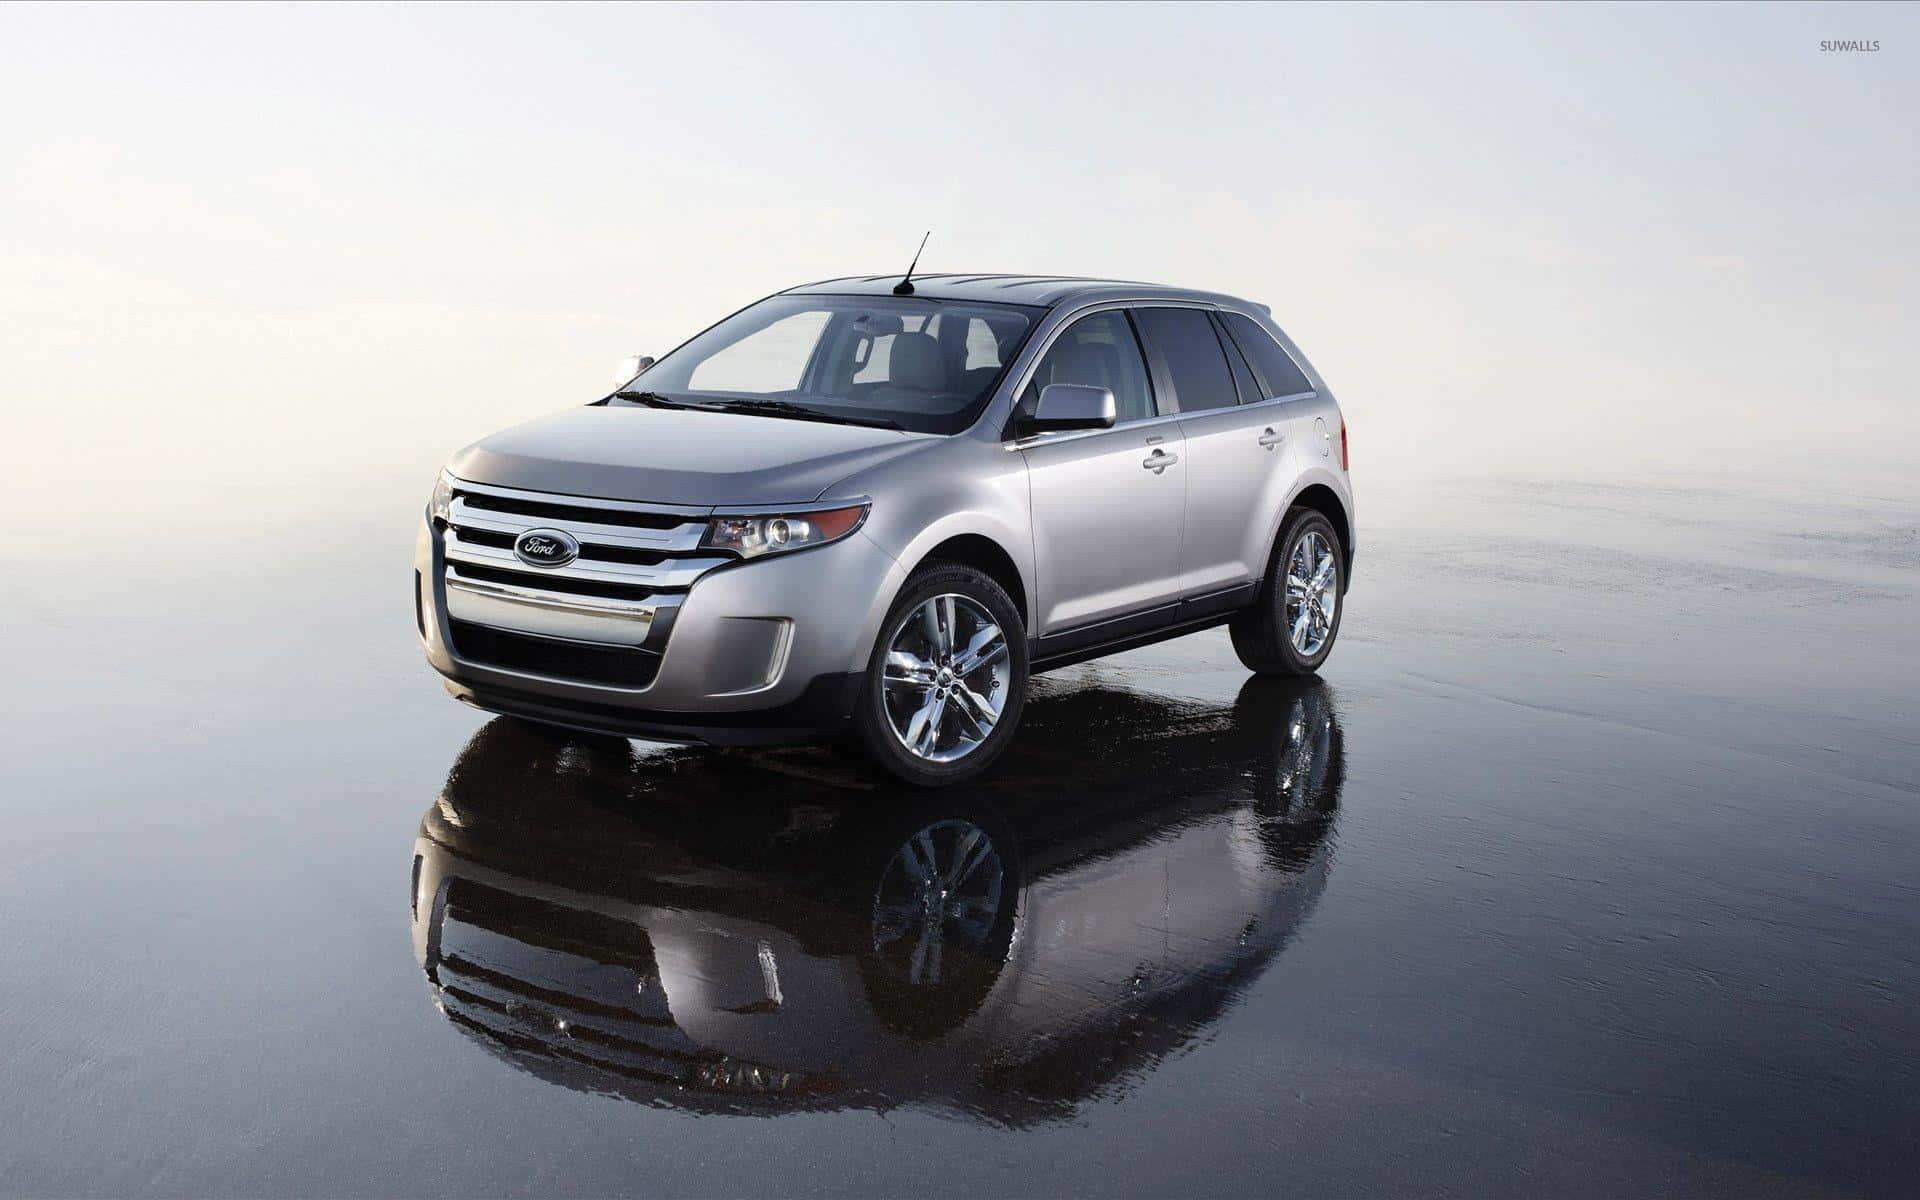 Stylish Ford Edge SUV on the Road Wallpaper